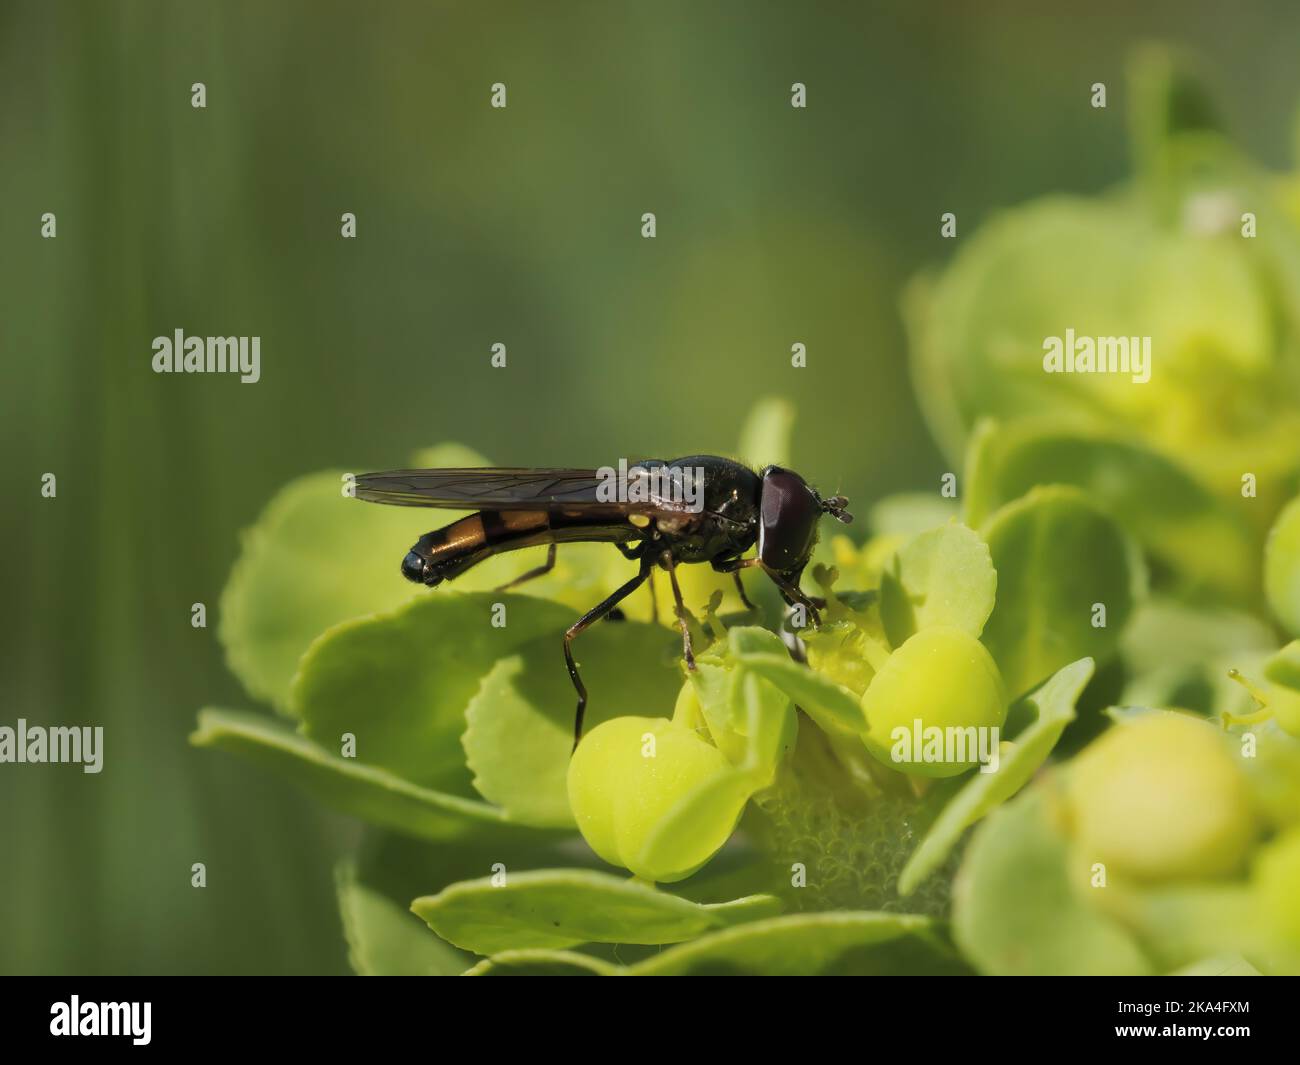 A closeup of a Platycheirus peltatus (Hoverfly) on a plant Stock Photo